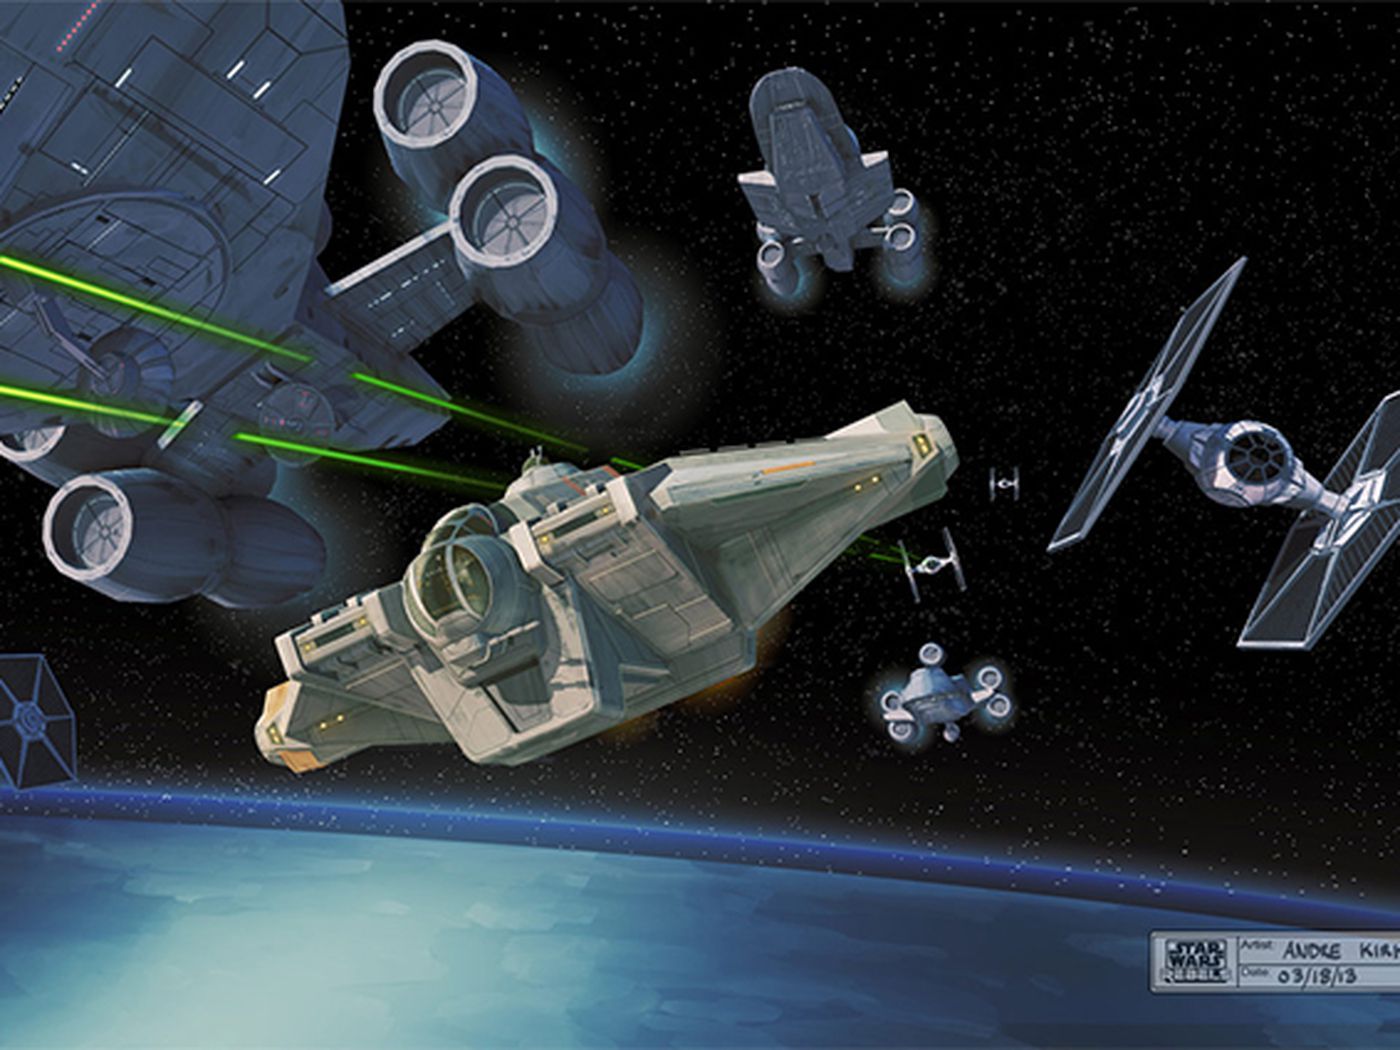 Take a first look at concept art from 'Star Wars Rebels' animated series